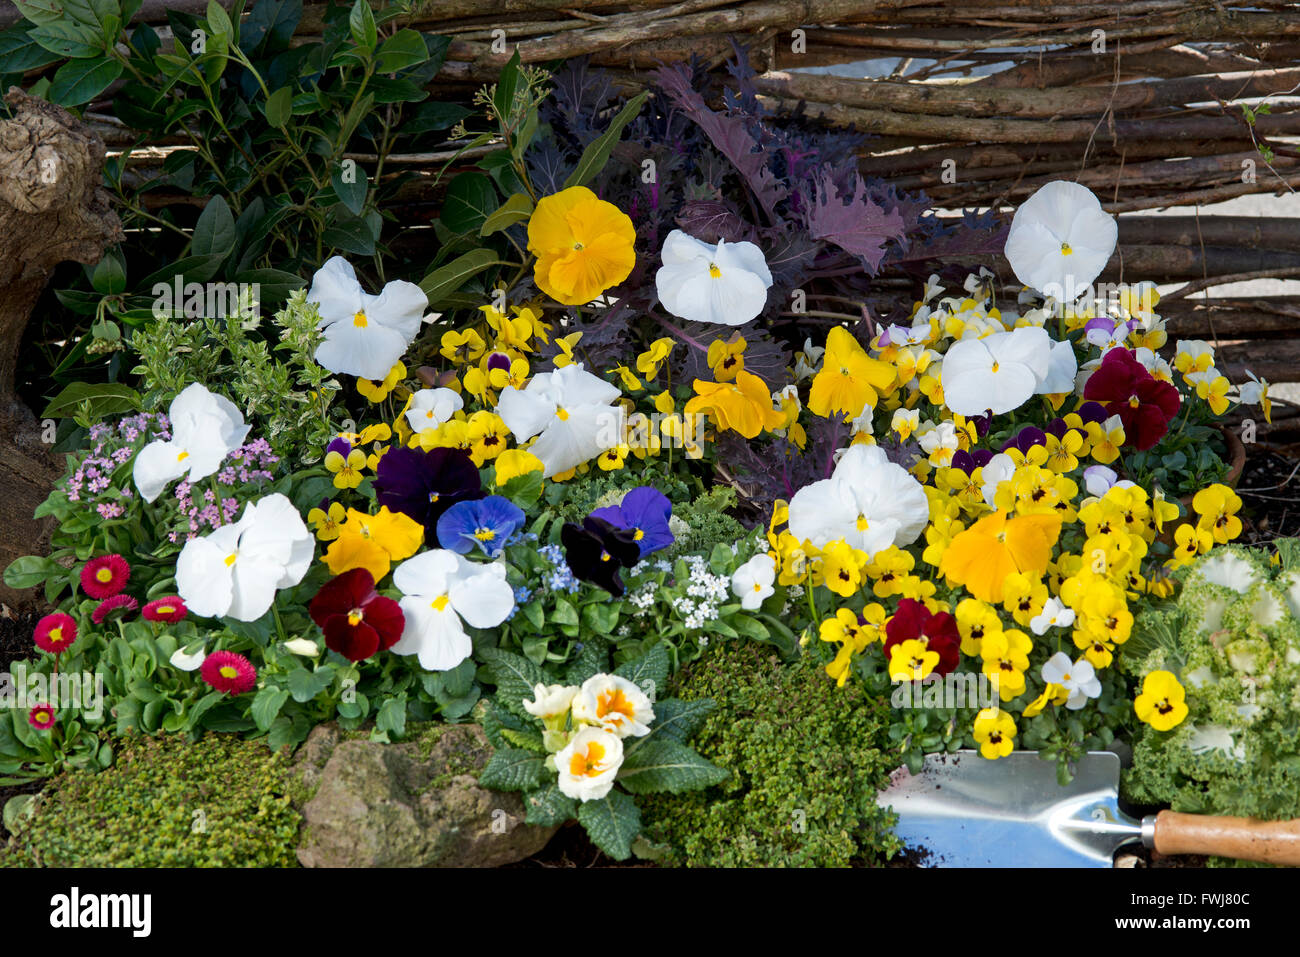 mixed pansies in colorful spring garden Stock Photo